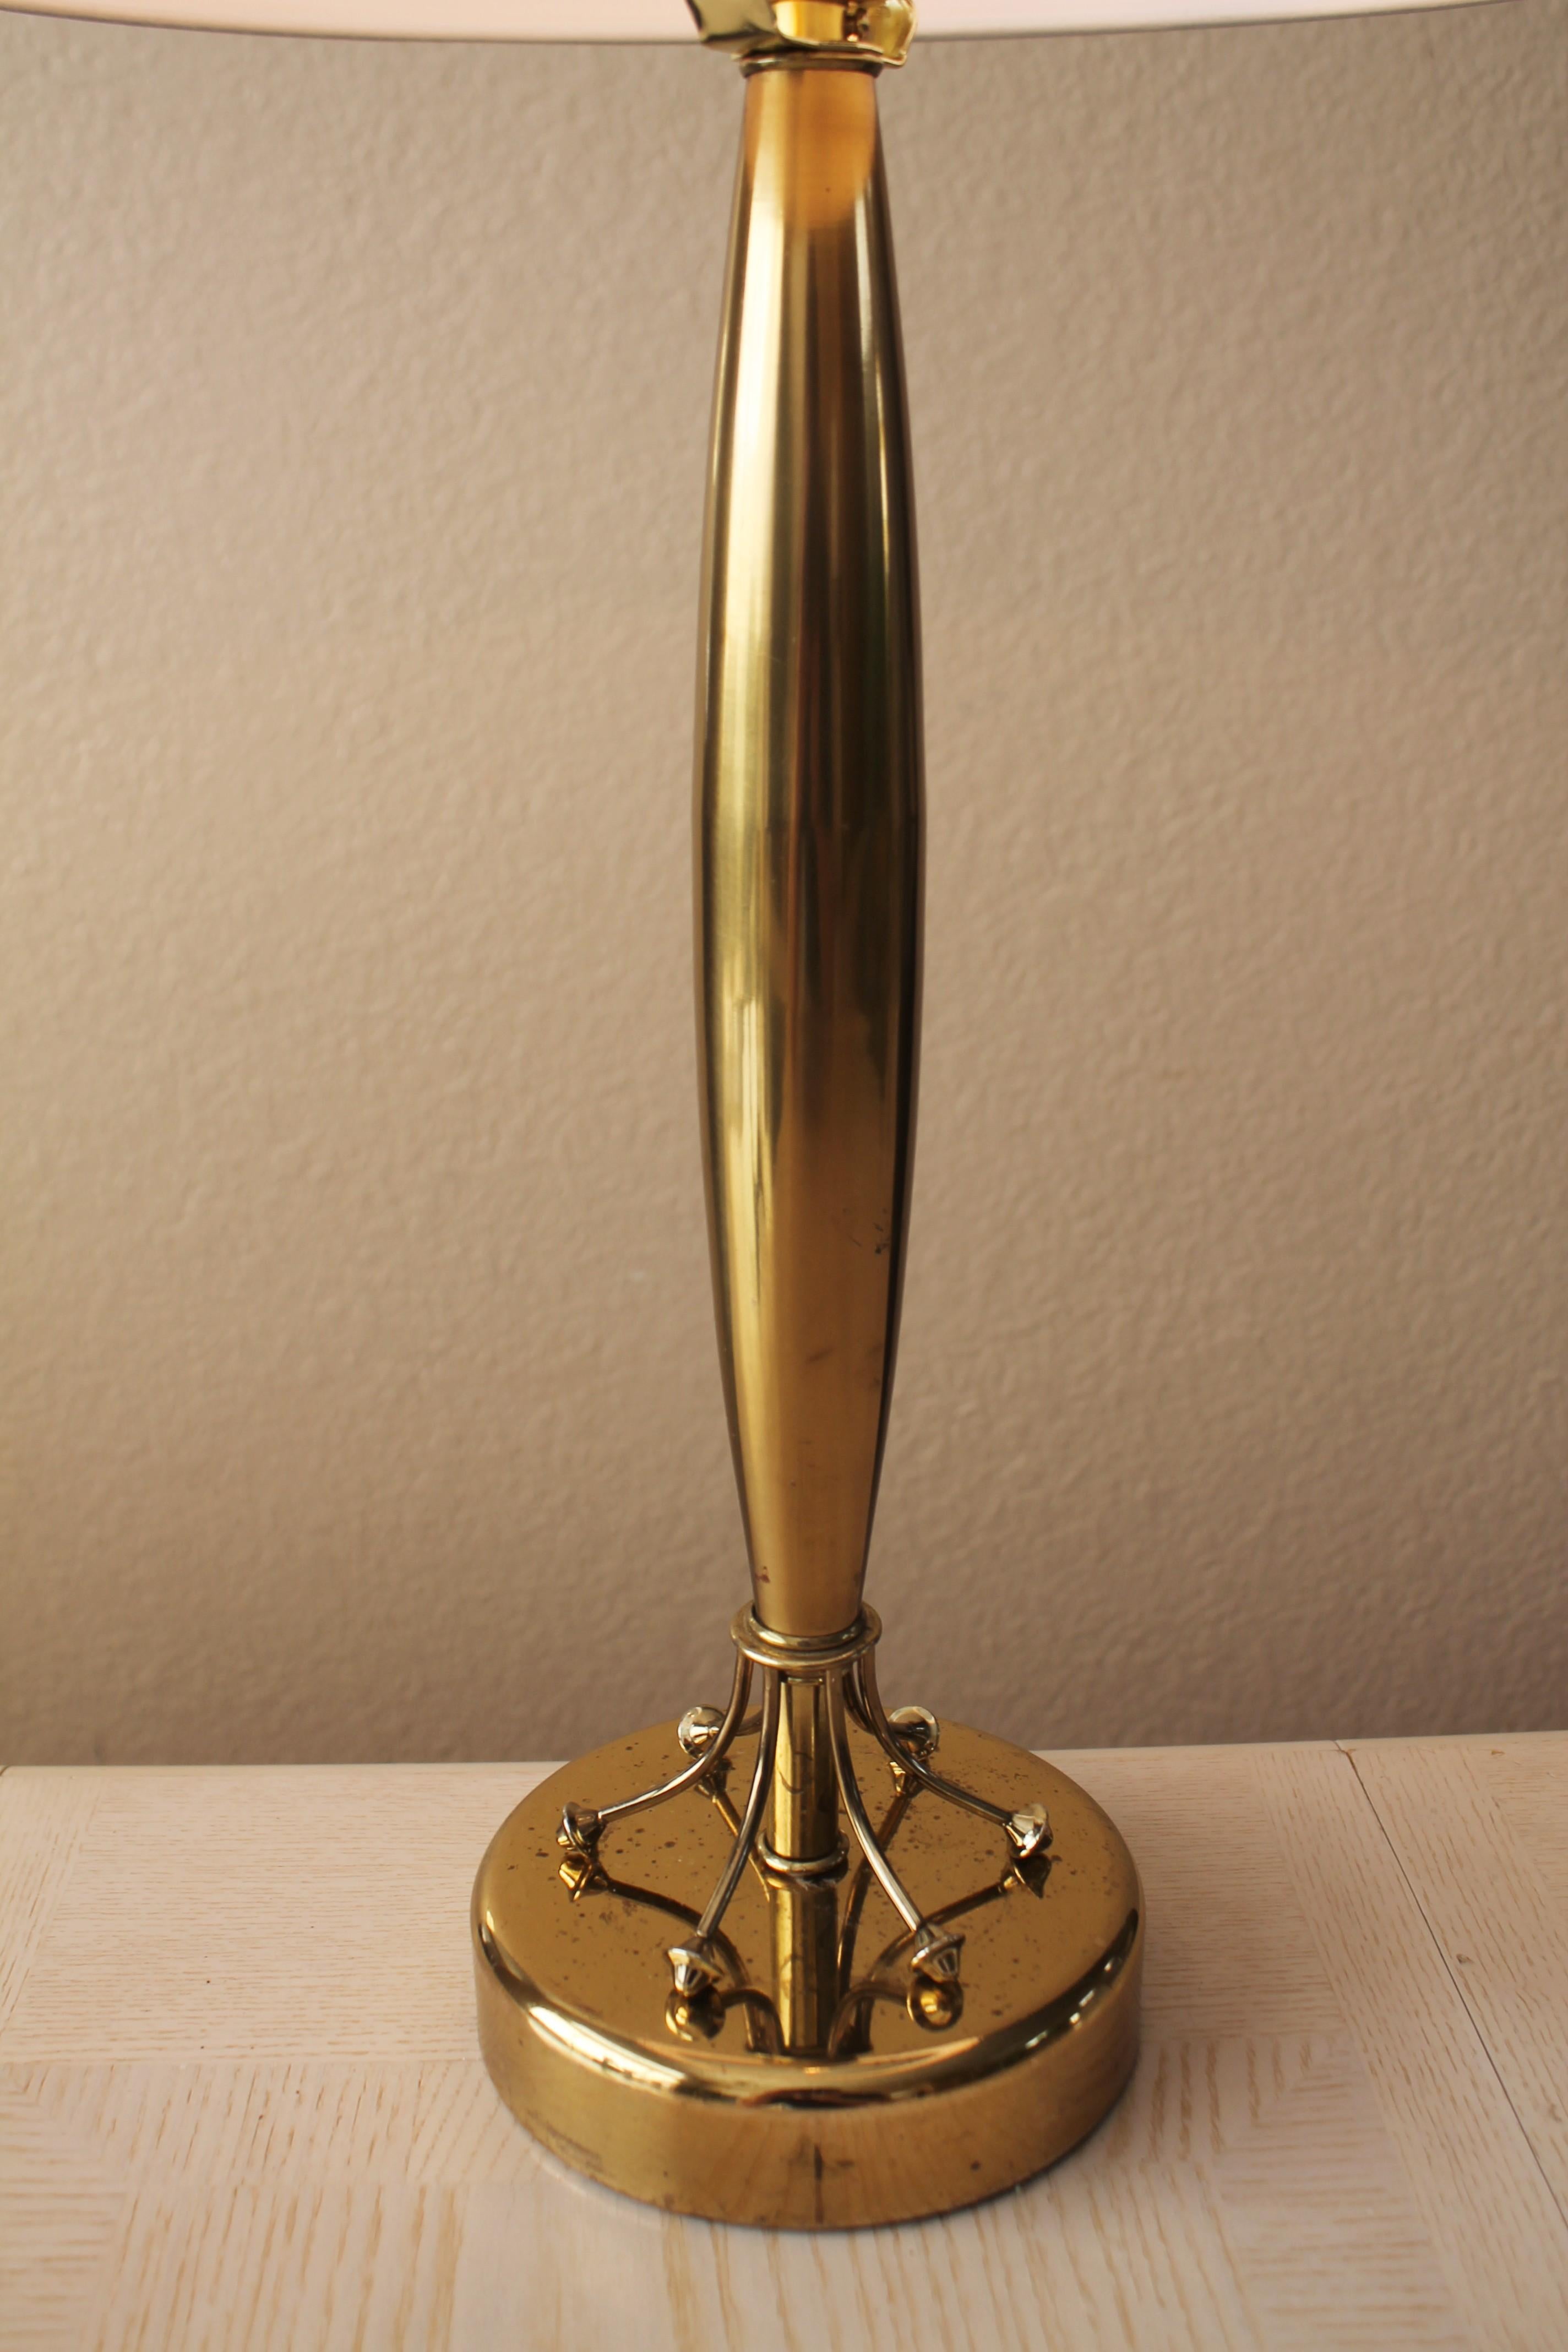 Stunning!


Mid Century Modern
Brass Accented 
Rocket Ship Style
Table Lamp!

Here is a marvelous mcm lamp with a really elegant 